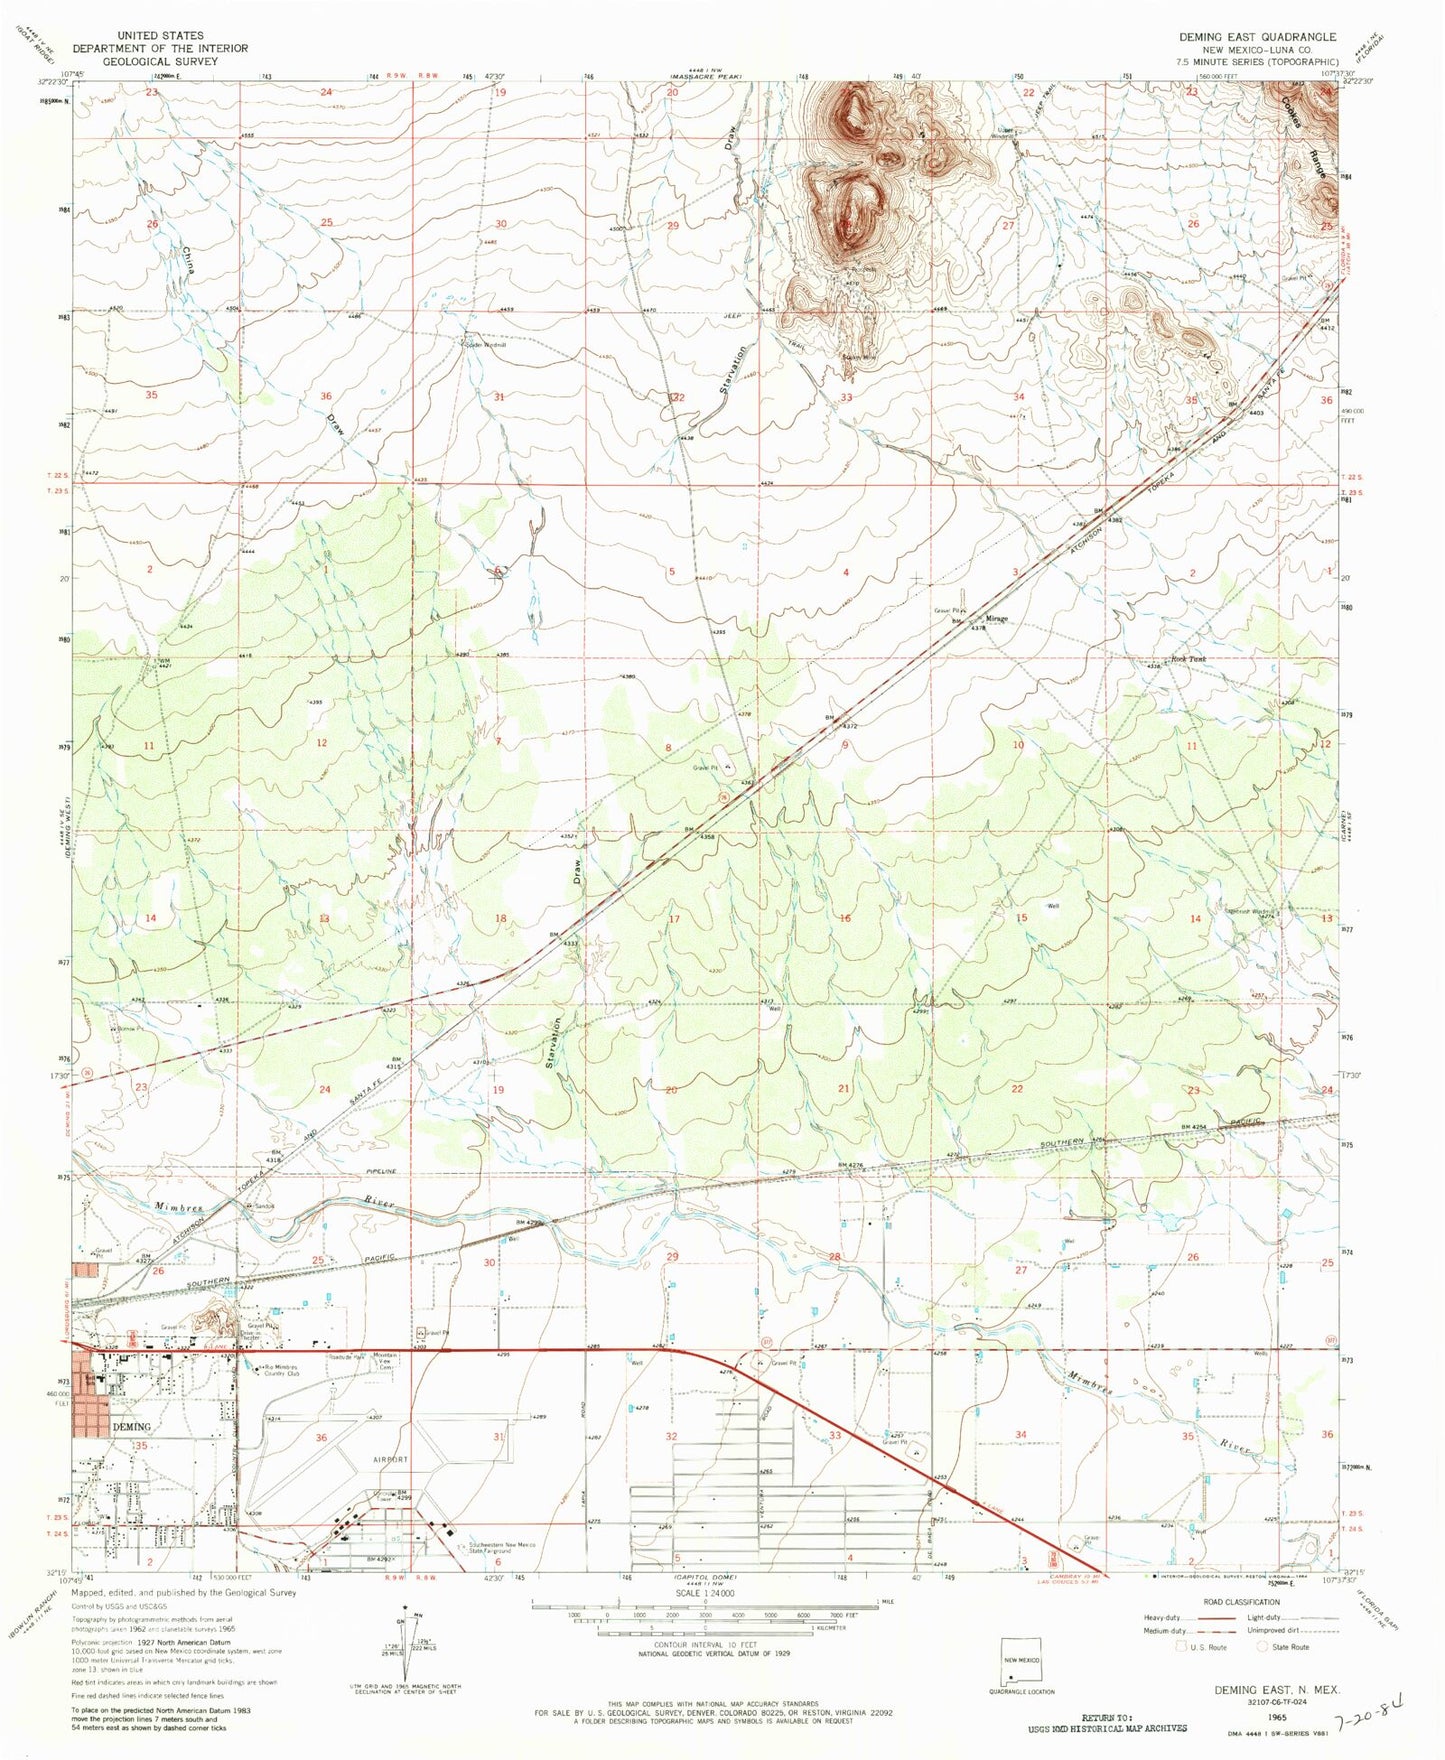 Classic USGS Deming East New Mexico 7.5'x7.5' Topo Map Image